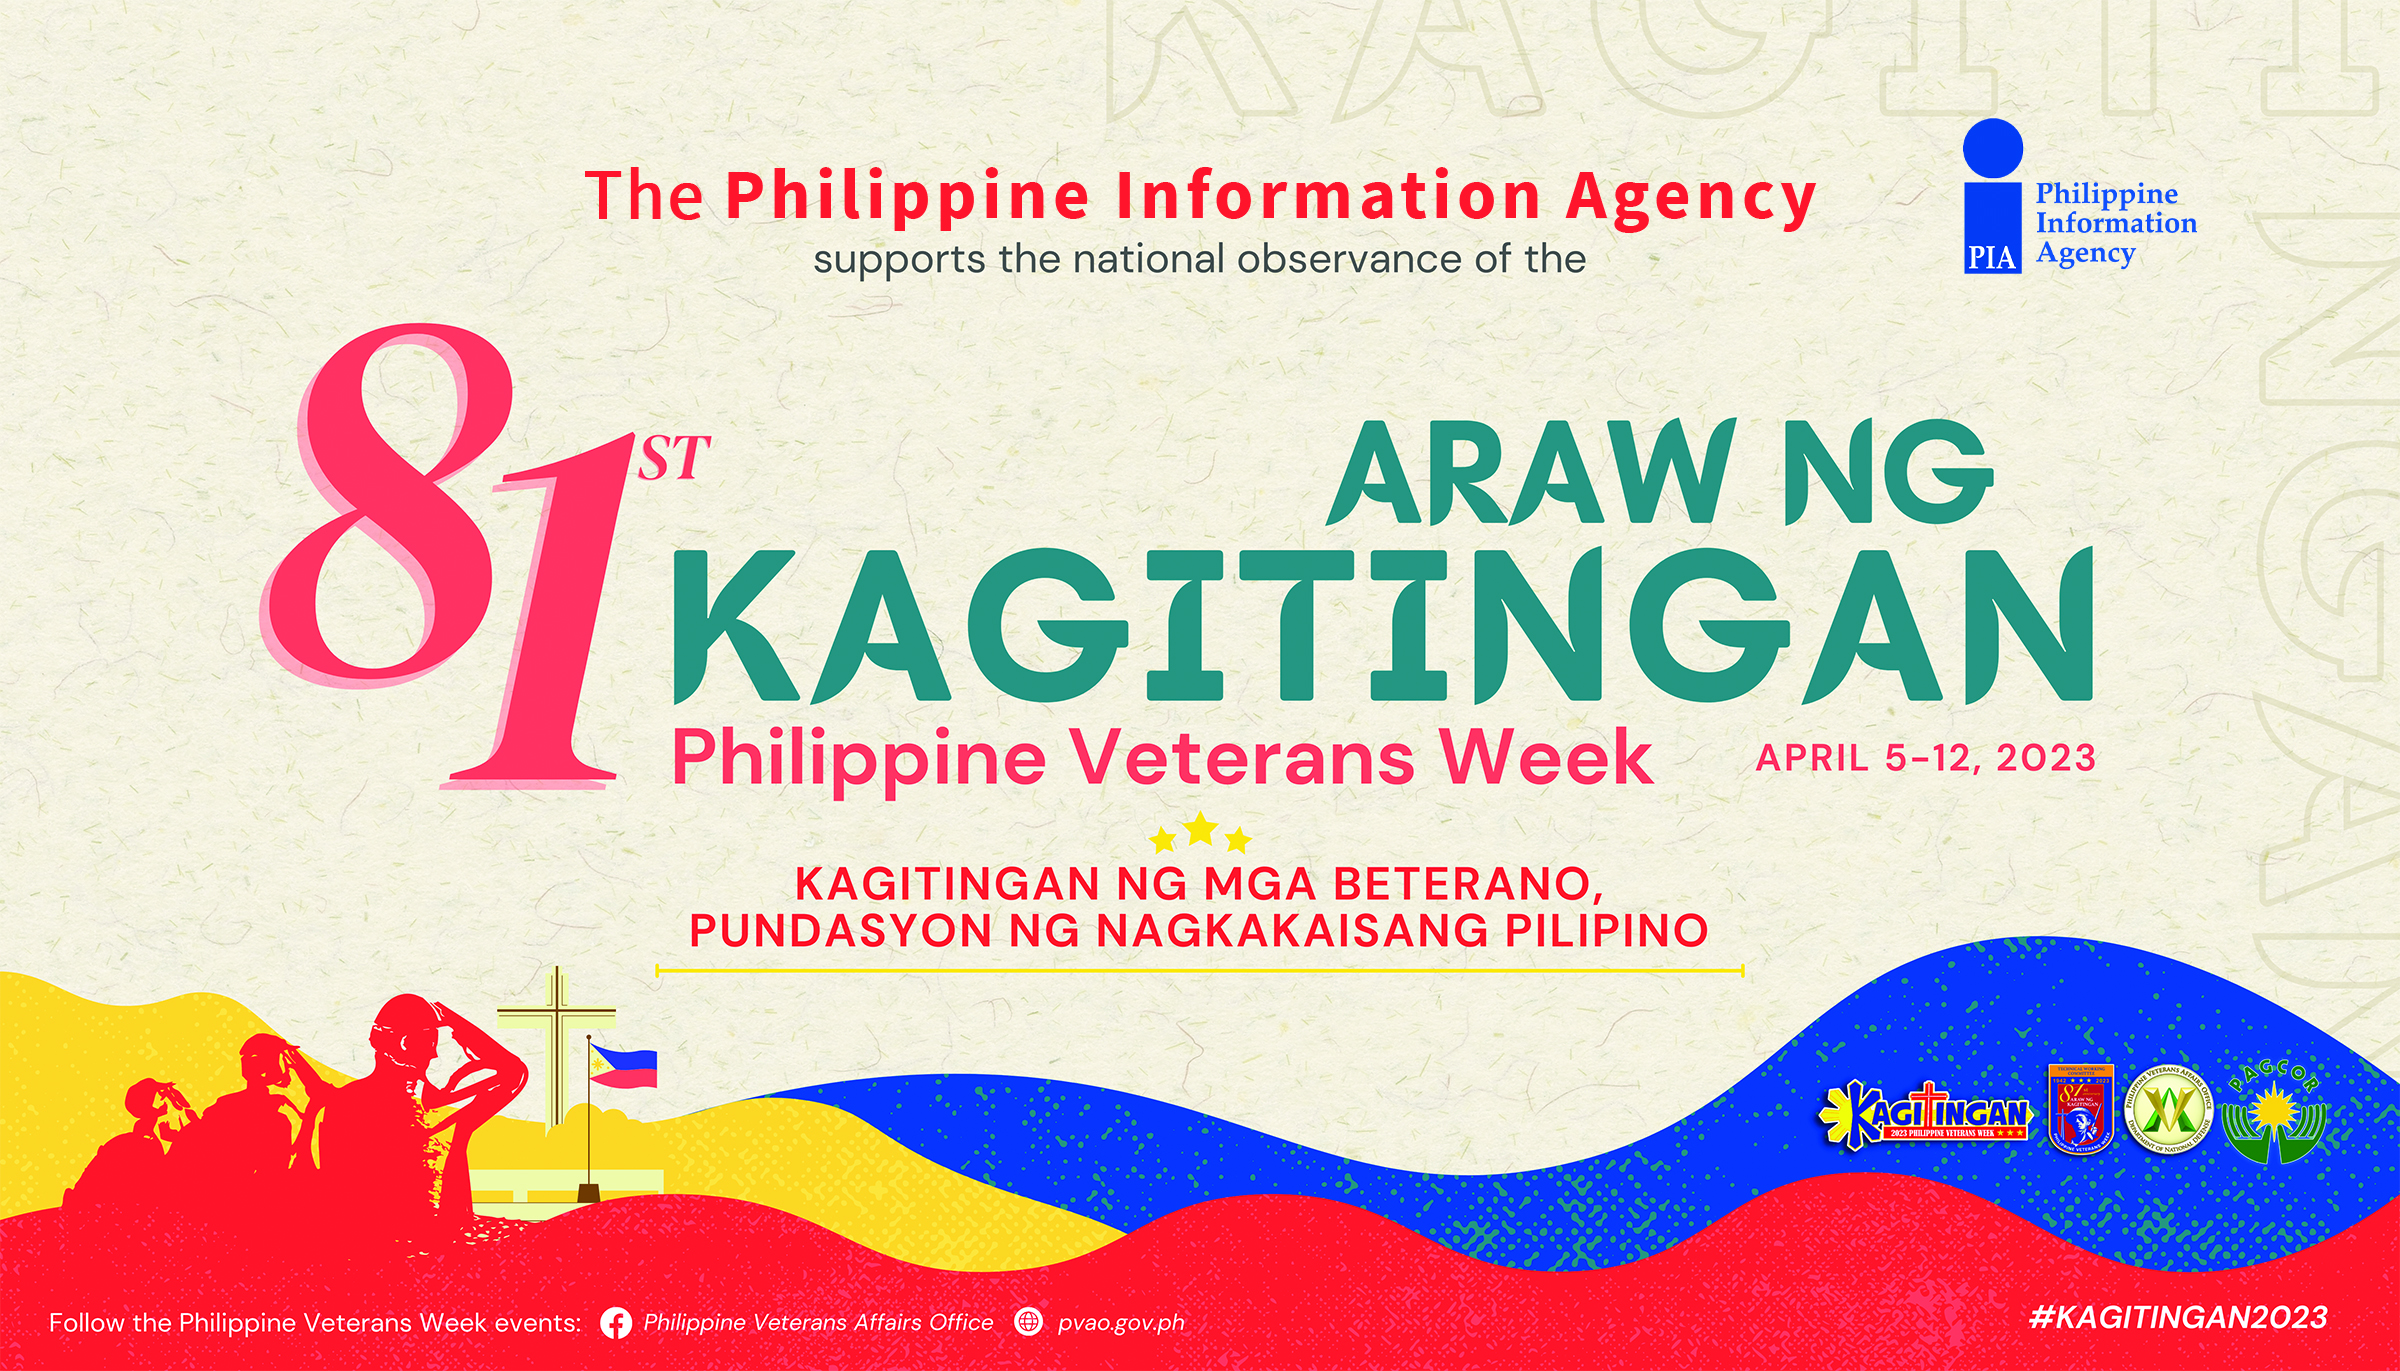 Philippine Information Agency supports national observance of 81st Araw ng Kagitingan and Philippine Veterans Week